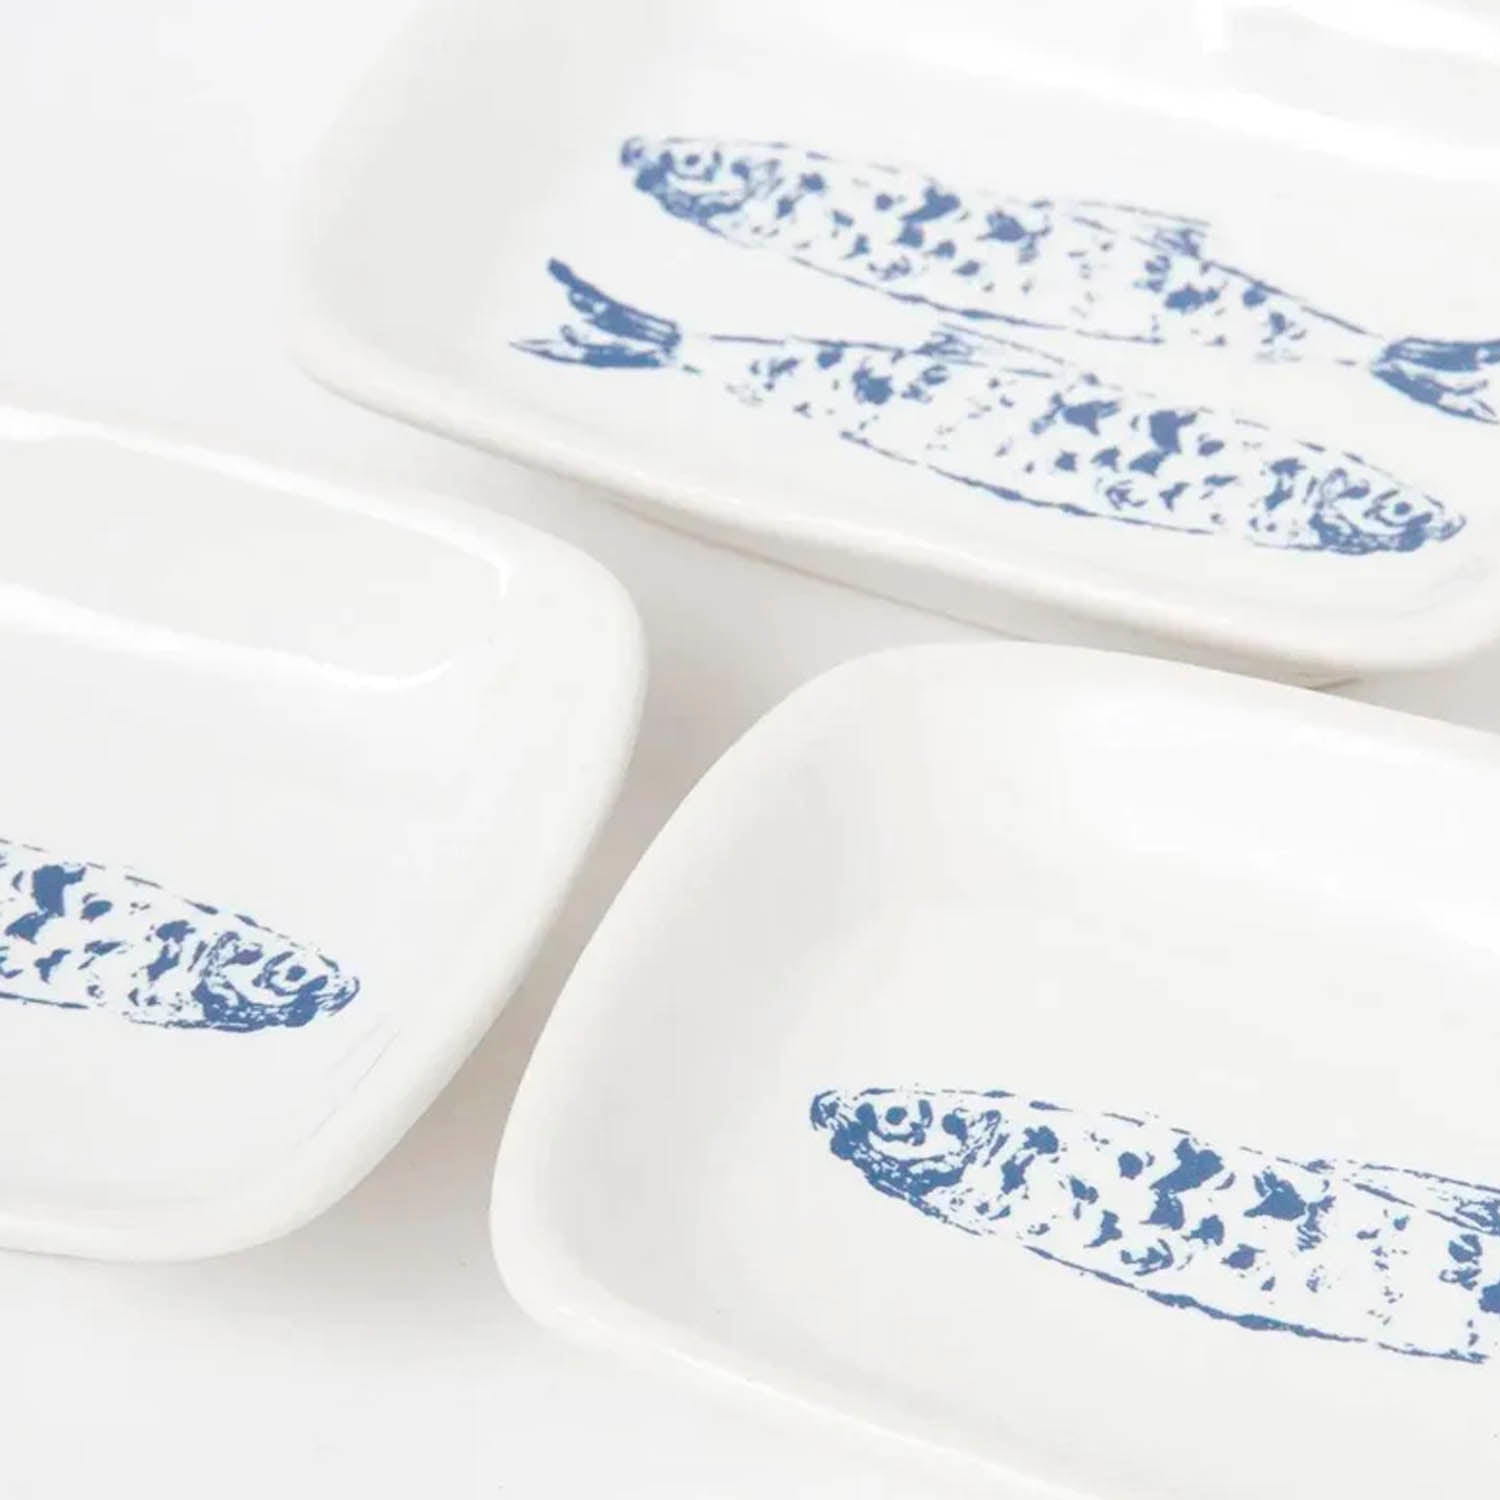 FISH PLATE SET OF 3